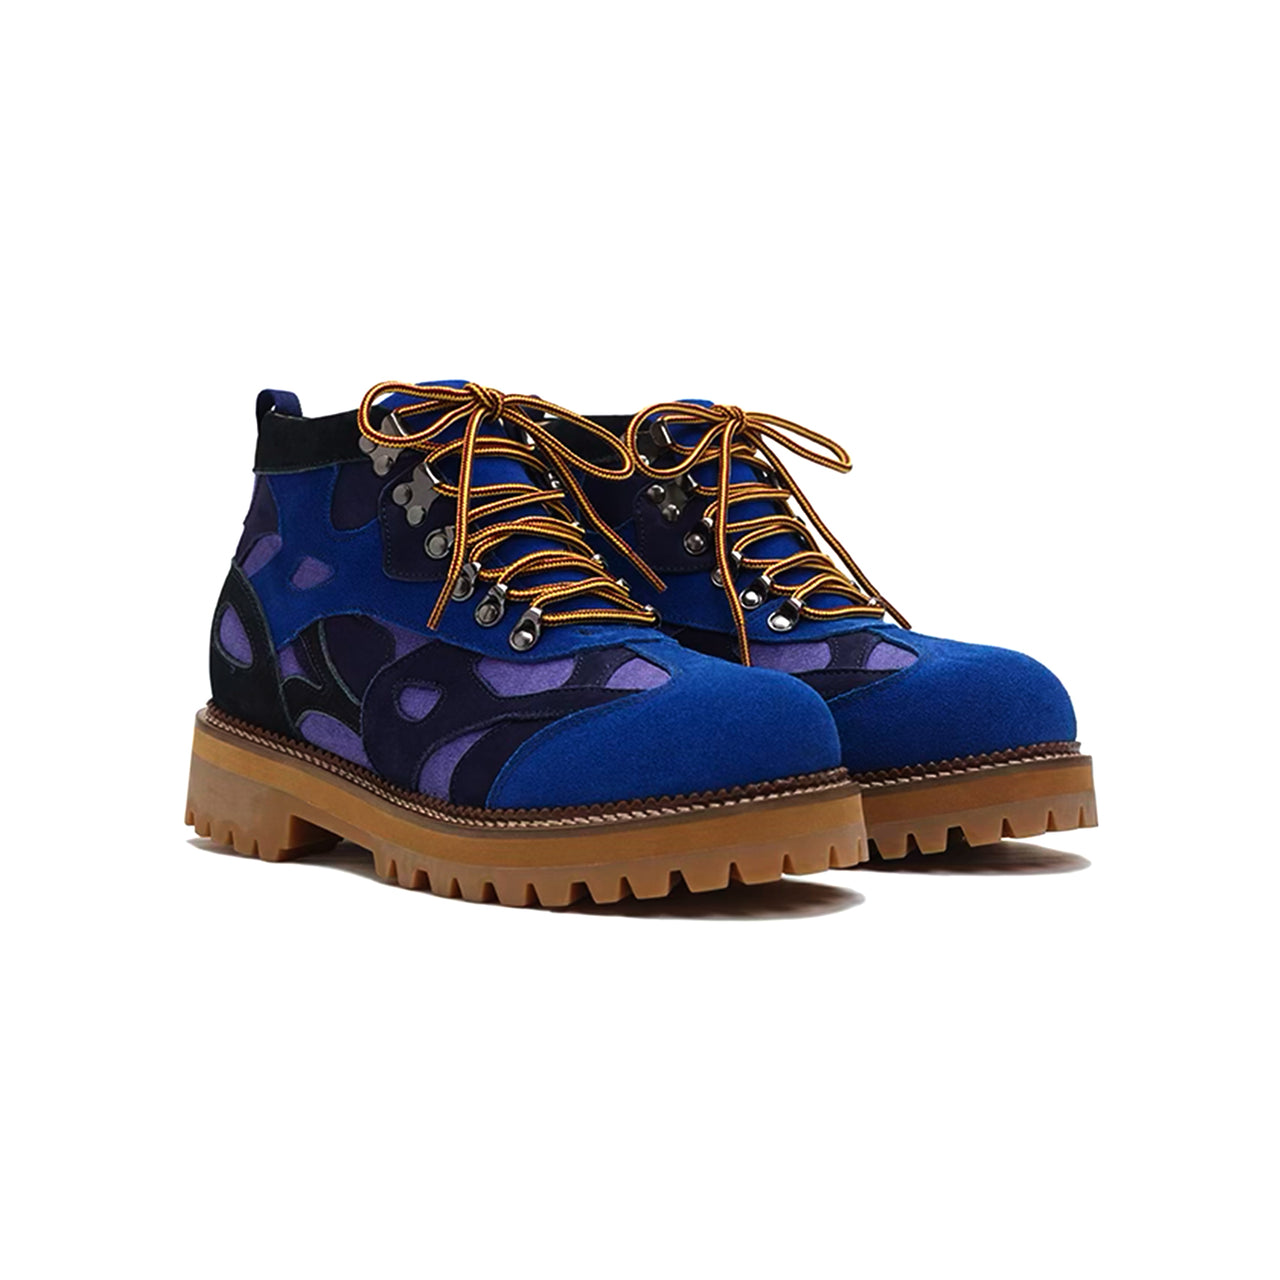 Boots With Swirls [Blue]